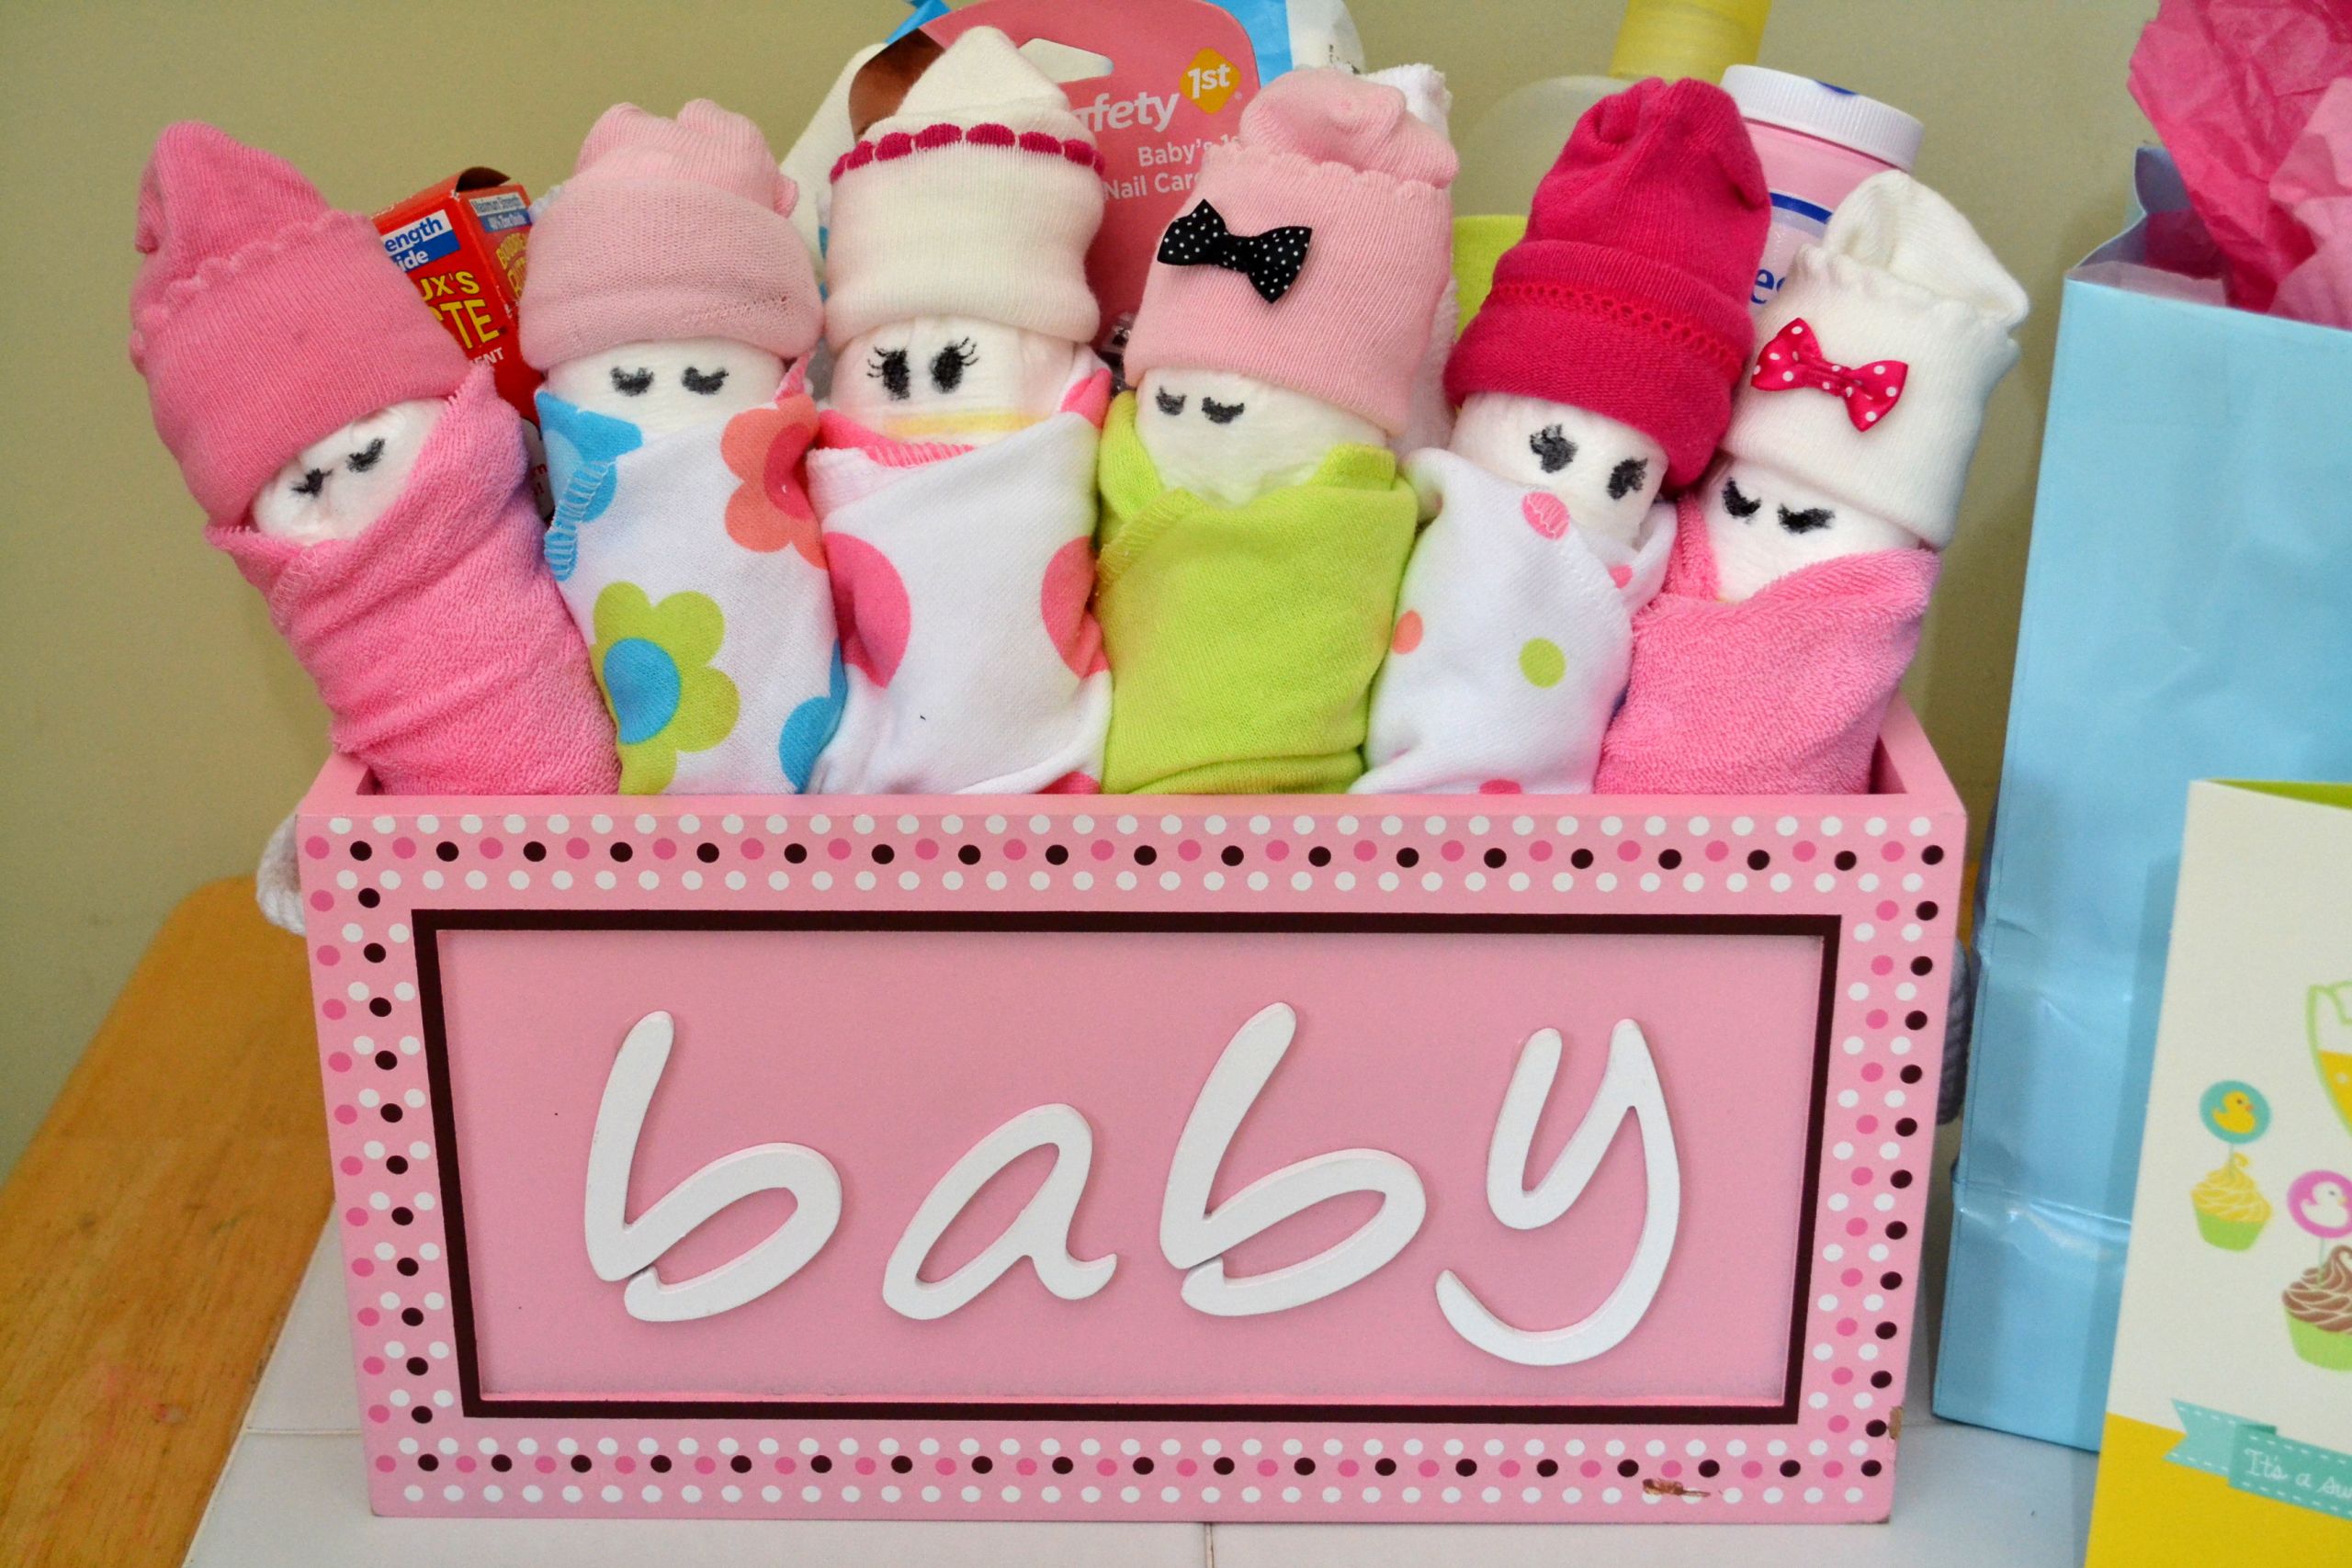 Diaper Baby Shower Gift Ideas
 Essential Baby Shower Gifts & DIY Diaper Babies